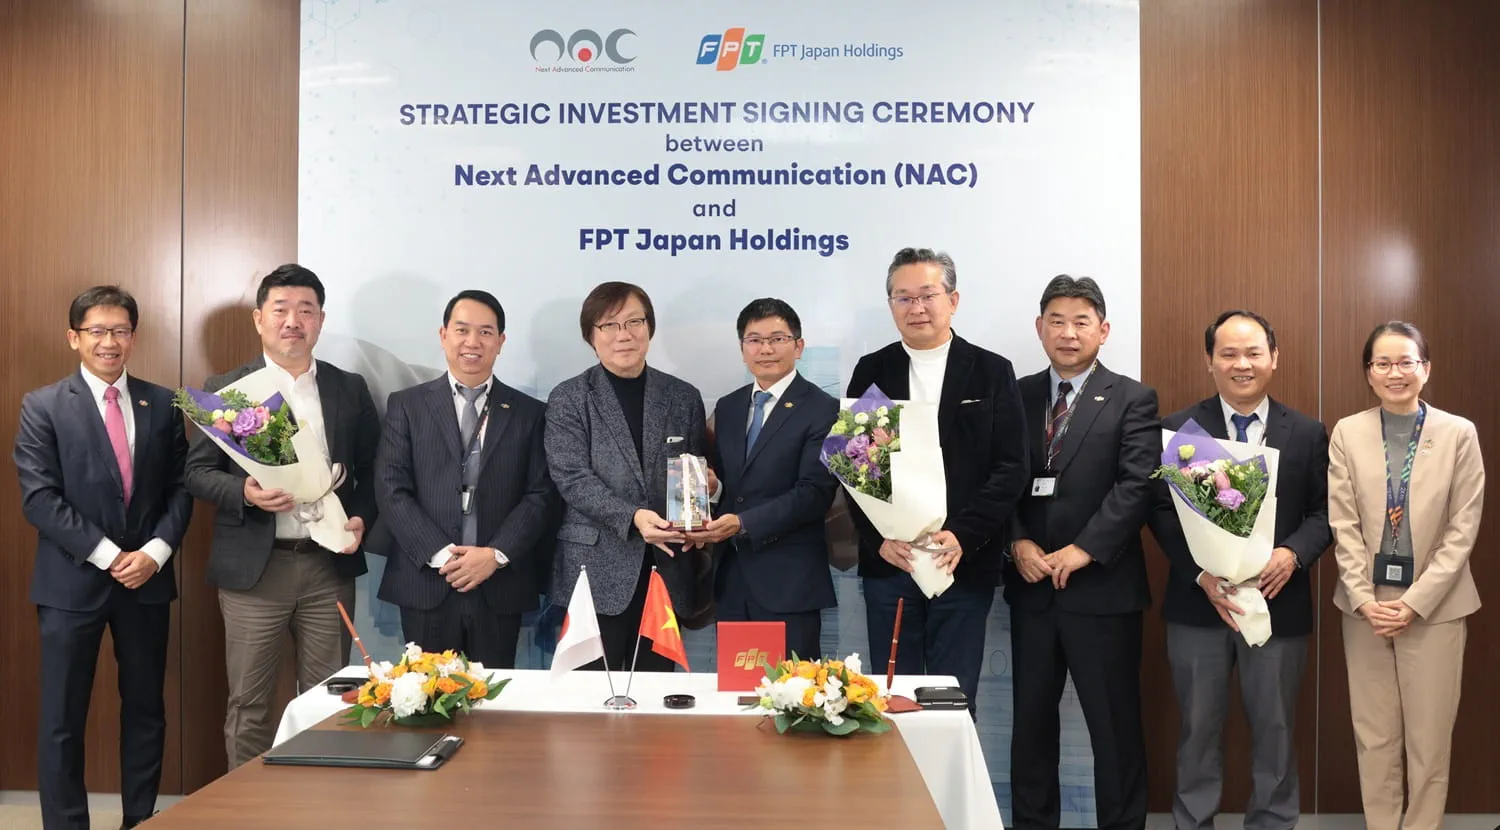 The strategic investment signing ceremony between NAC and FPT took place in Tokyo, Japan